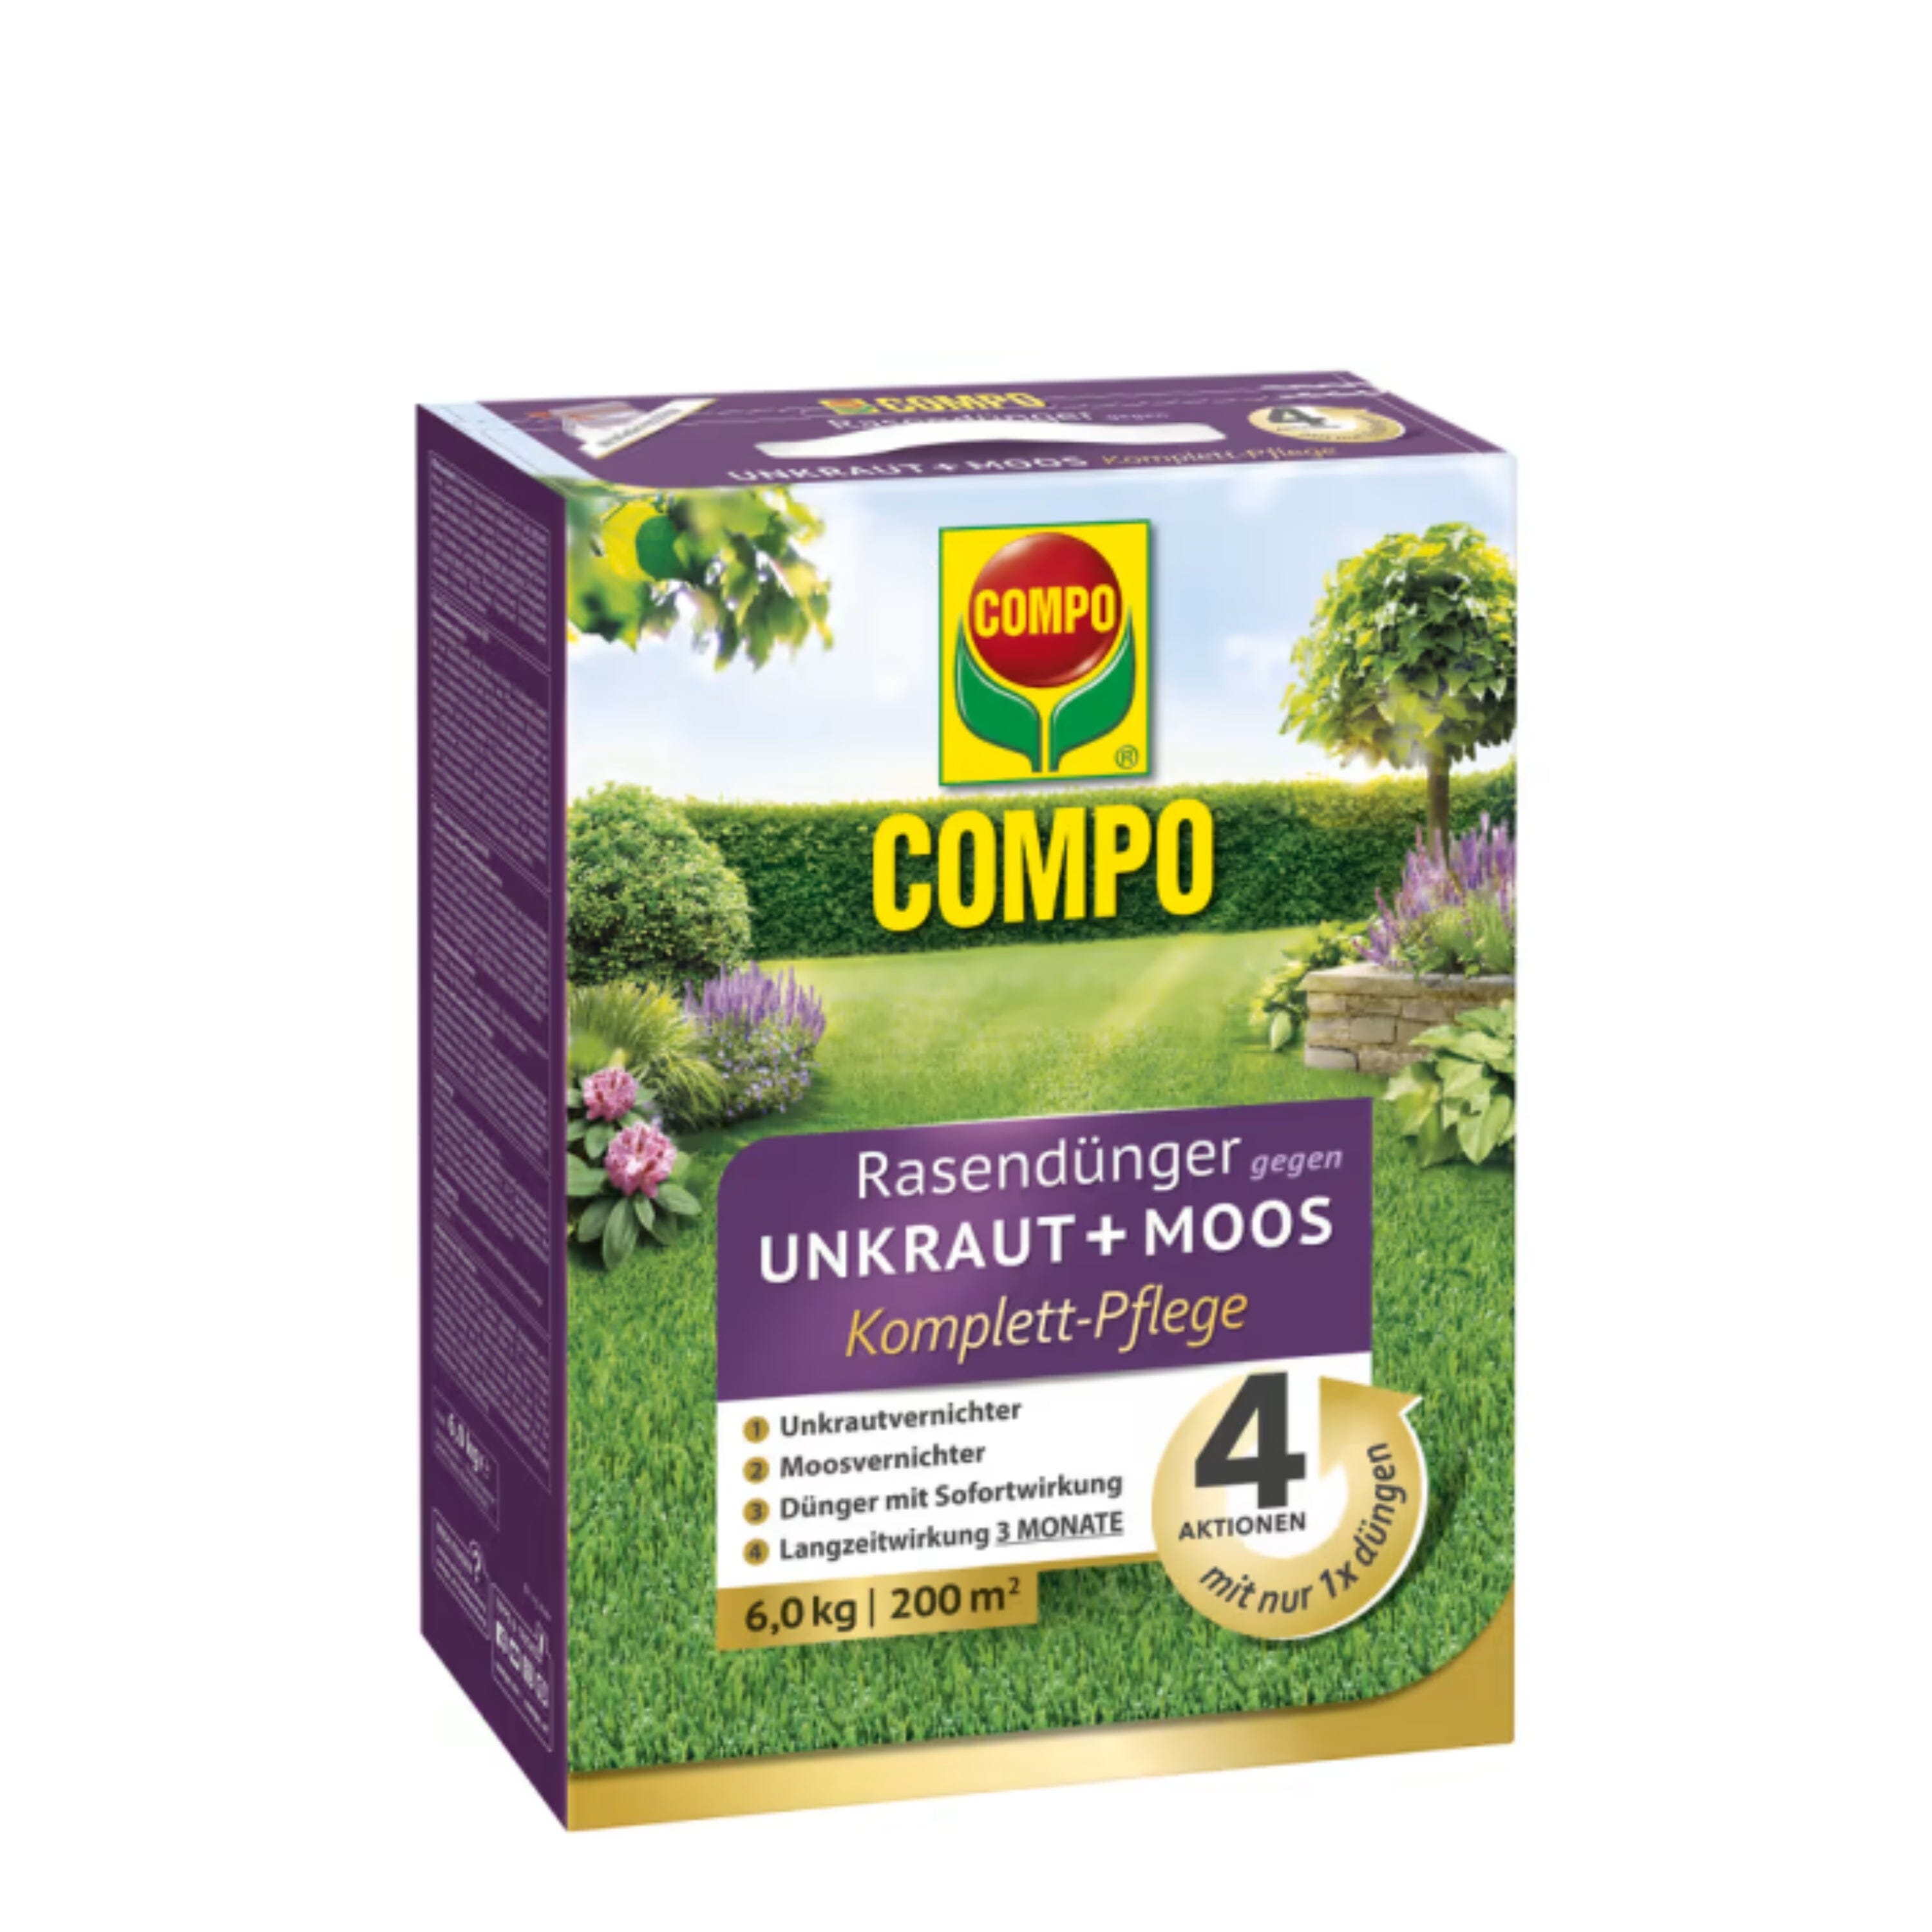 COMPO lawn fertilizer against weeds + moss complete care COMPO